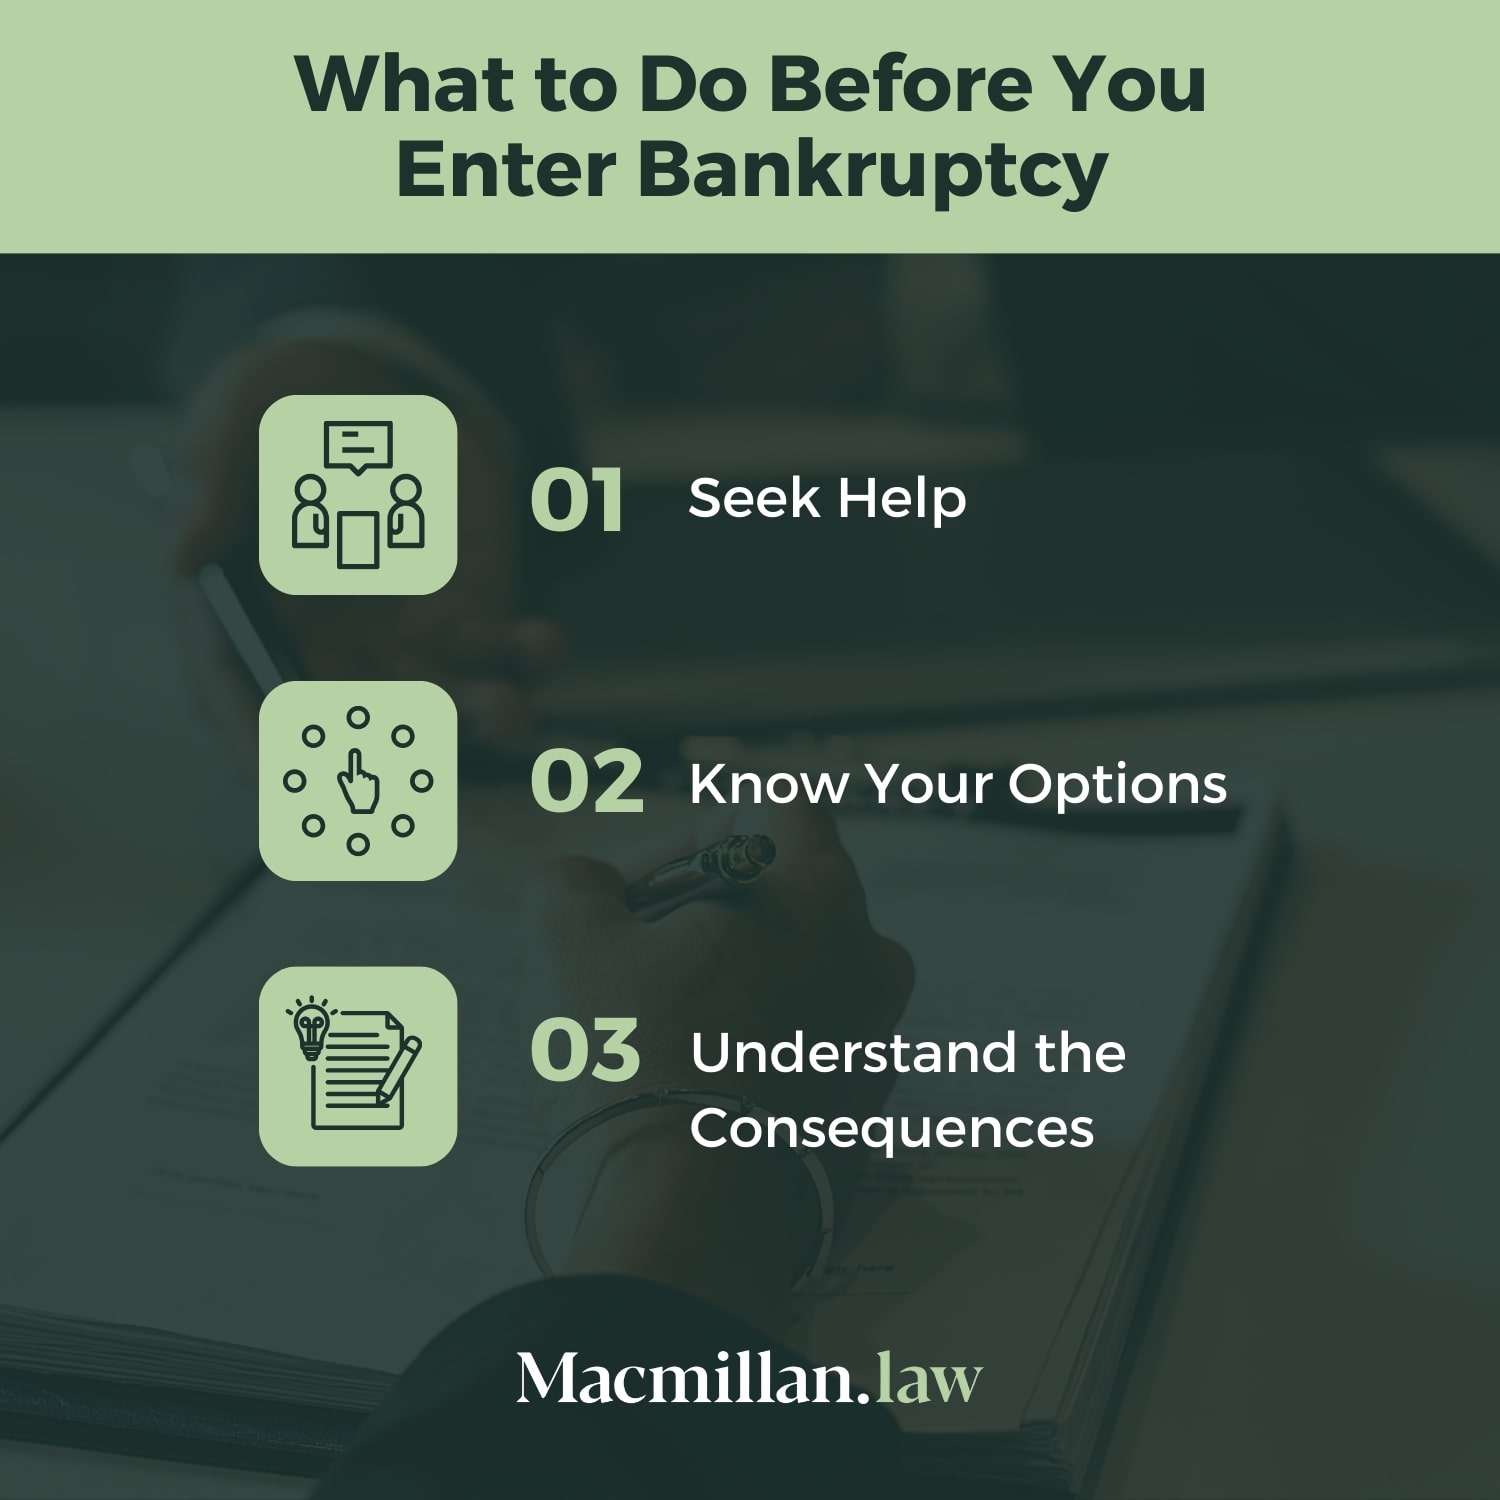 What to do before you enter bankruptcy